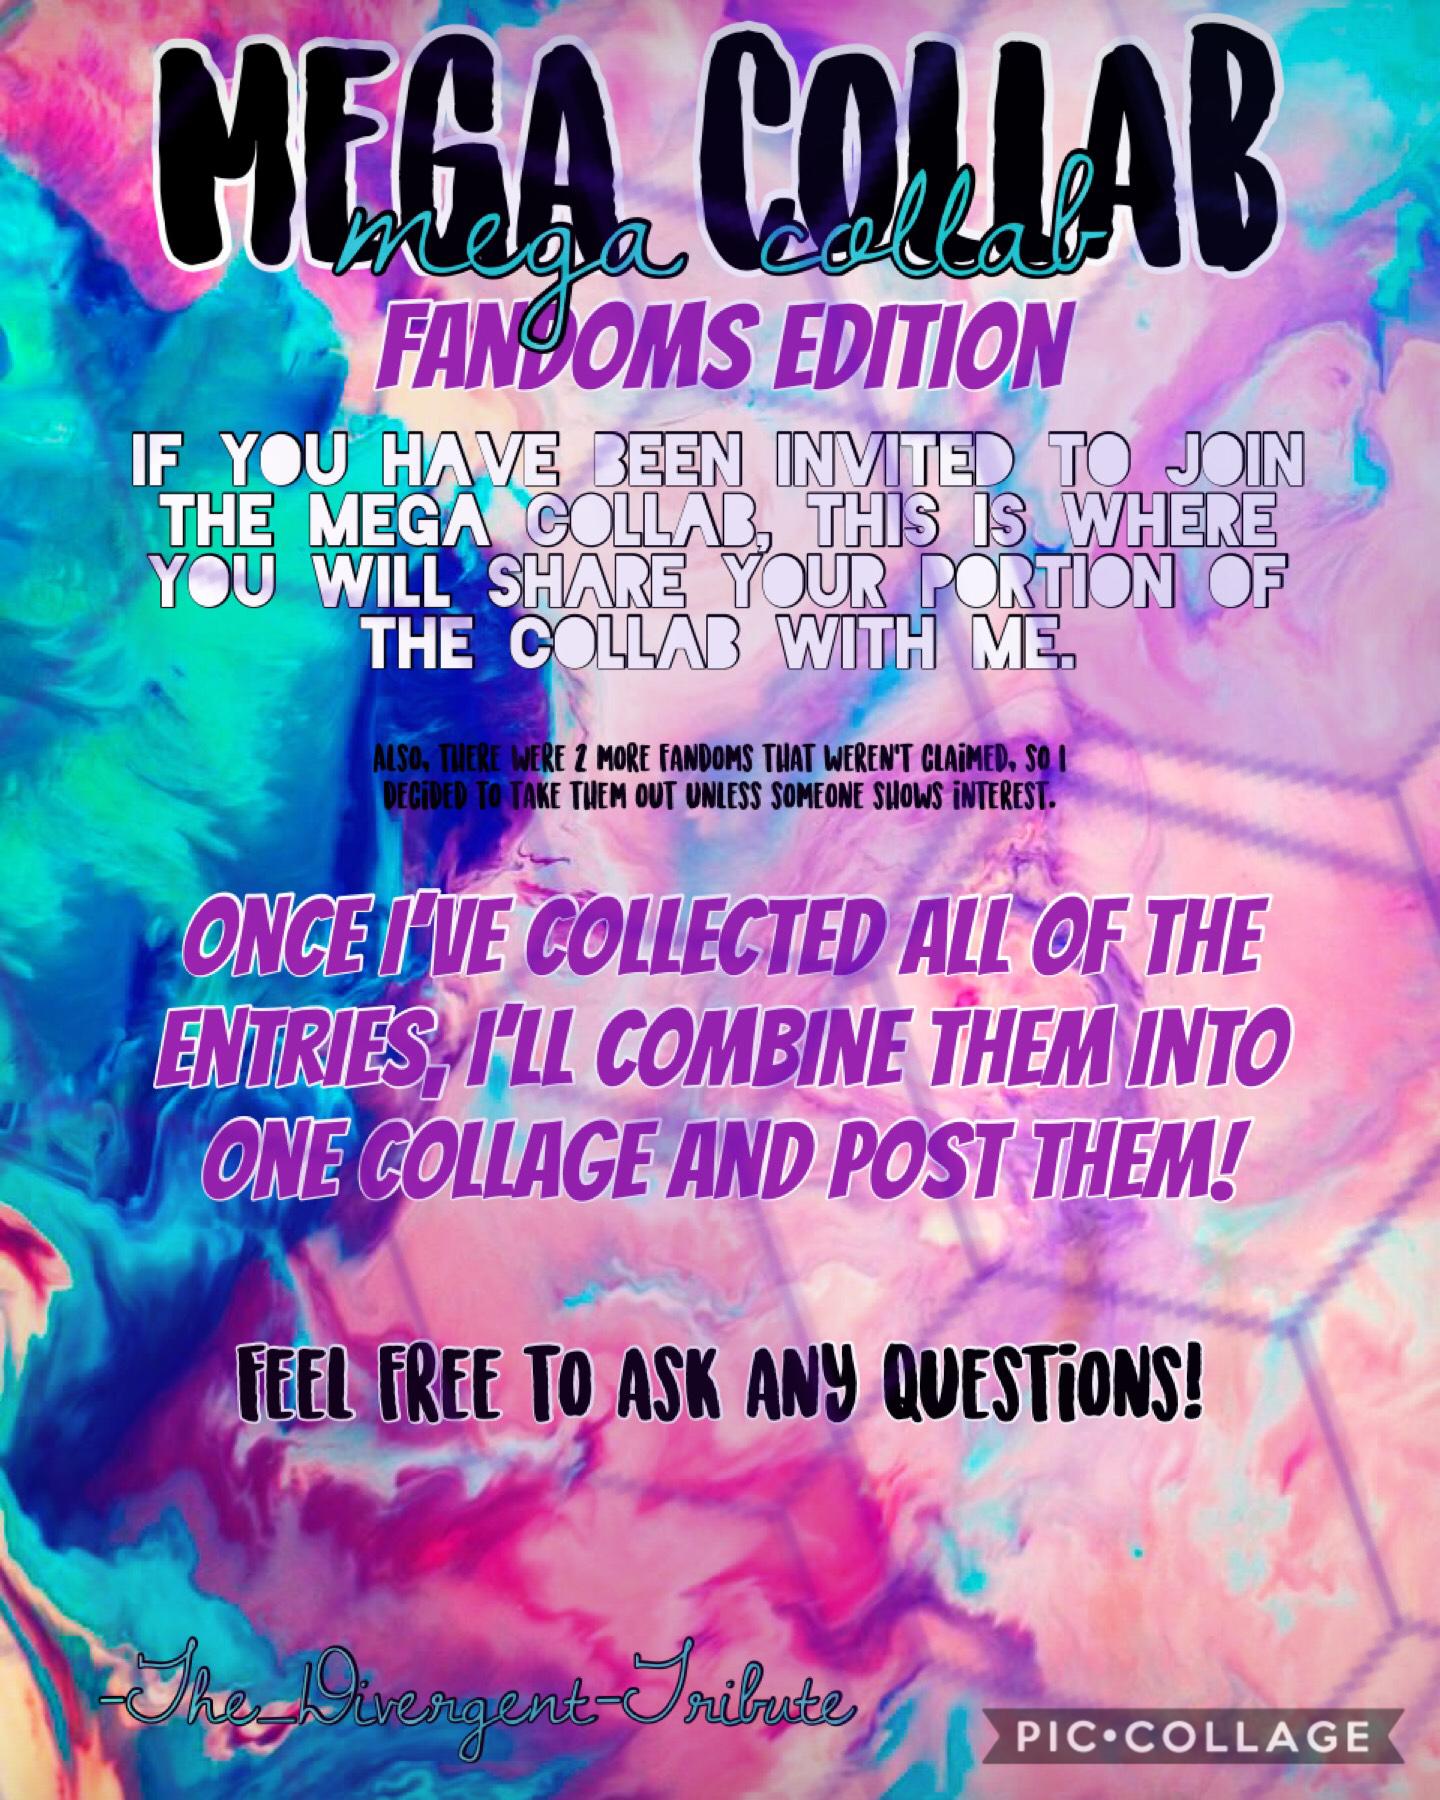 Feel free to ask any questions! Share your creation and I’ll combine all 5 of them into one Mega Collab!!